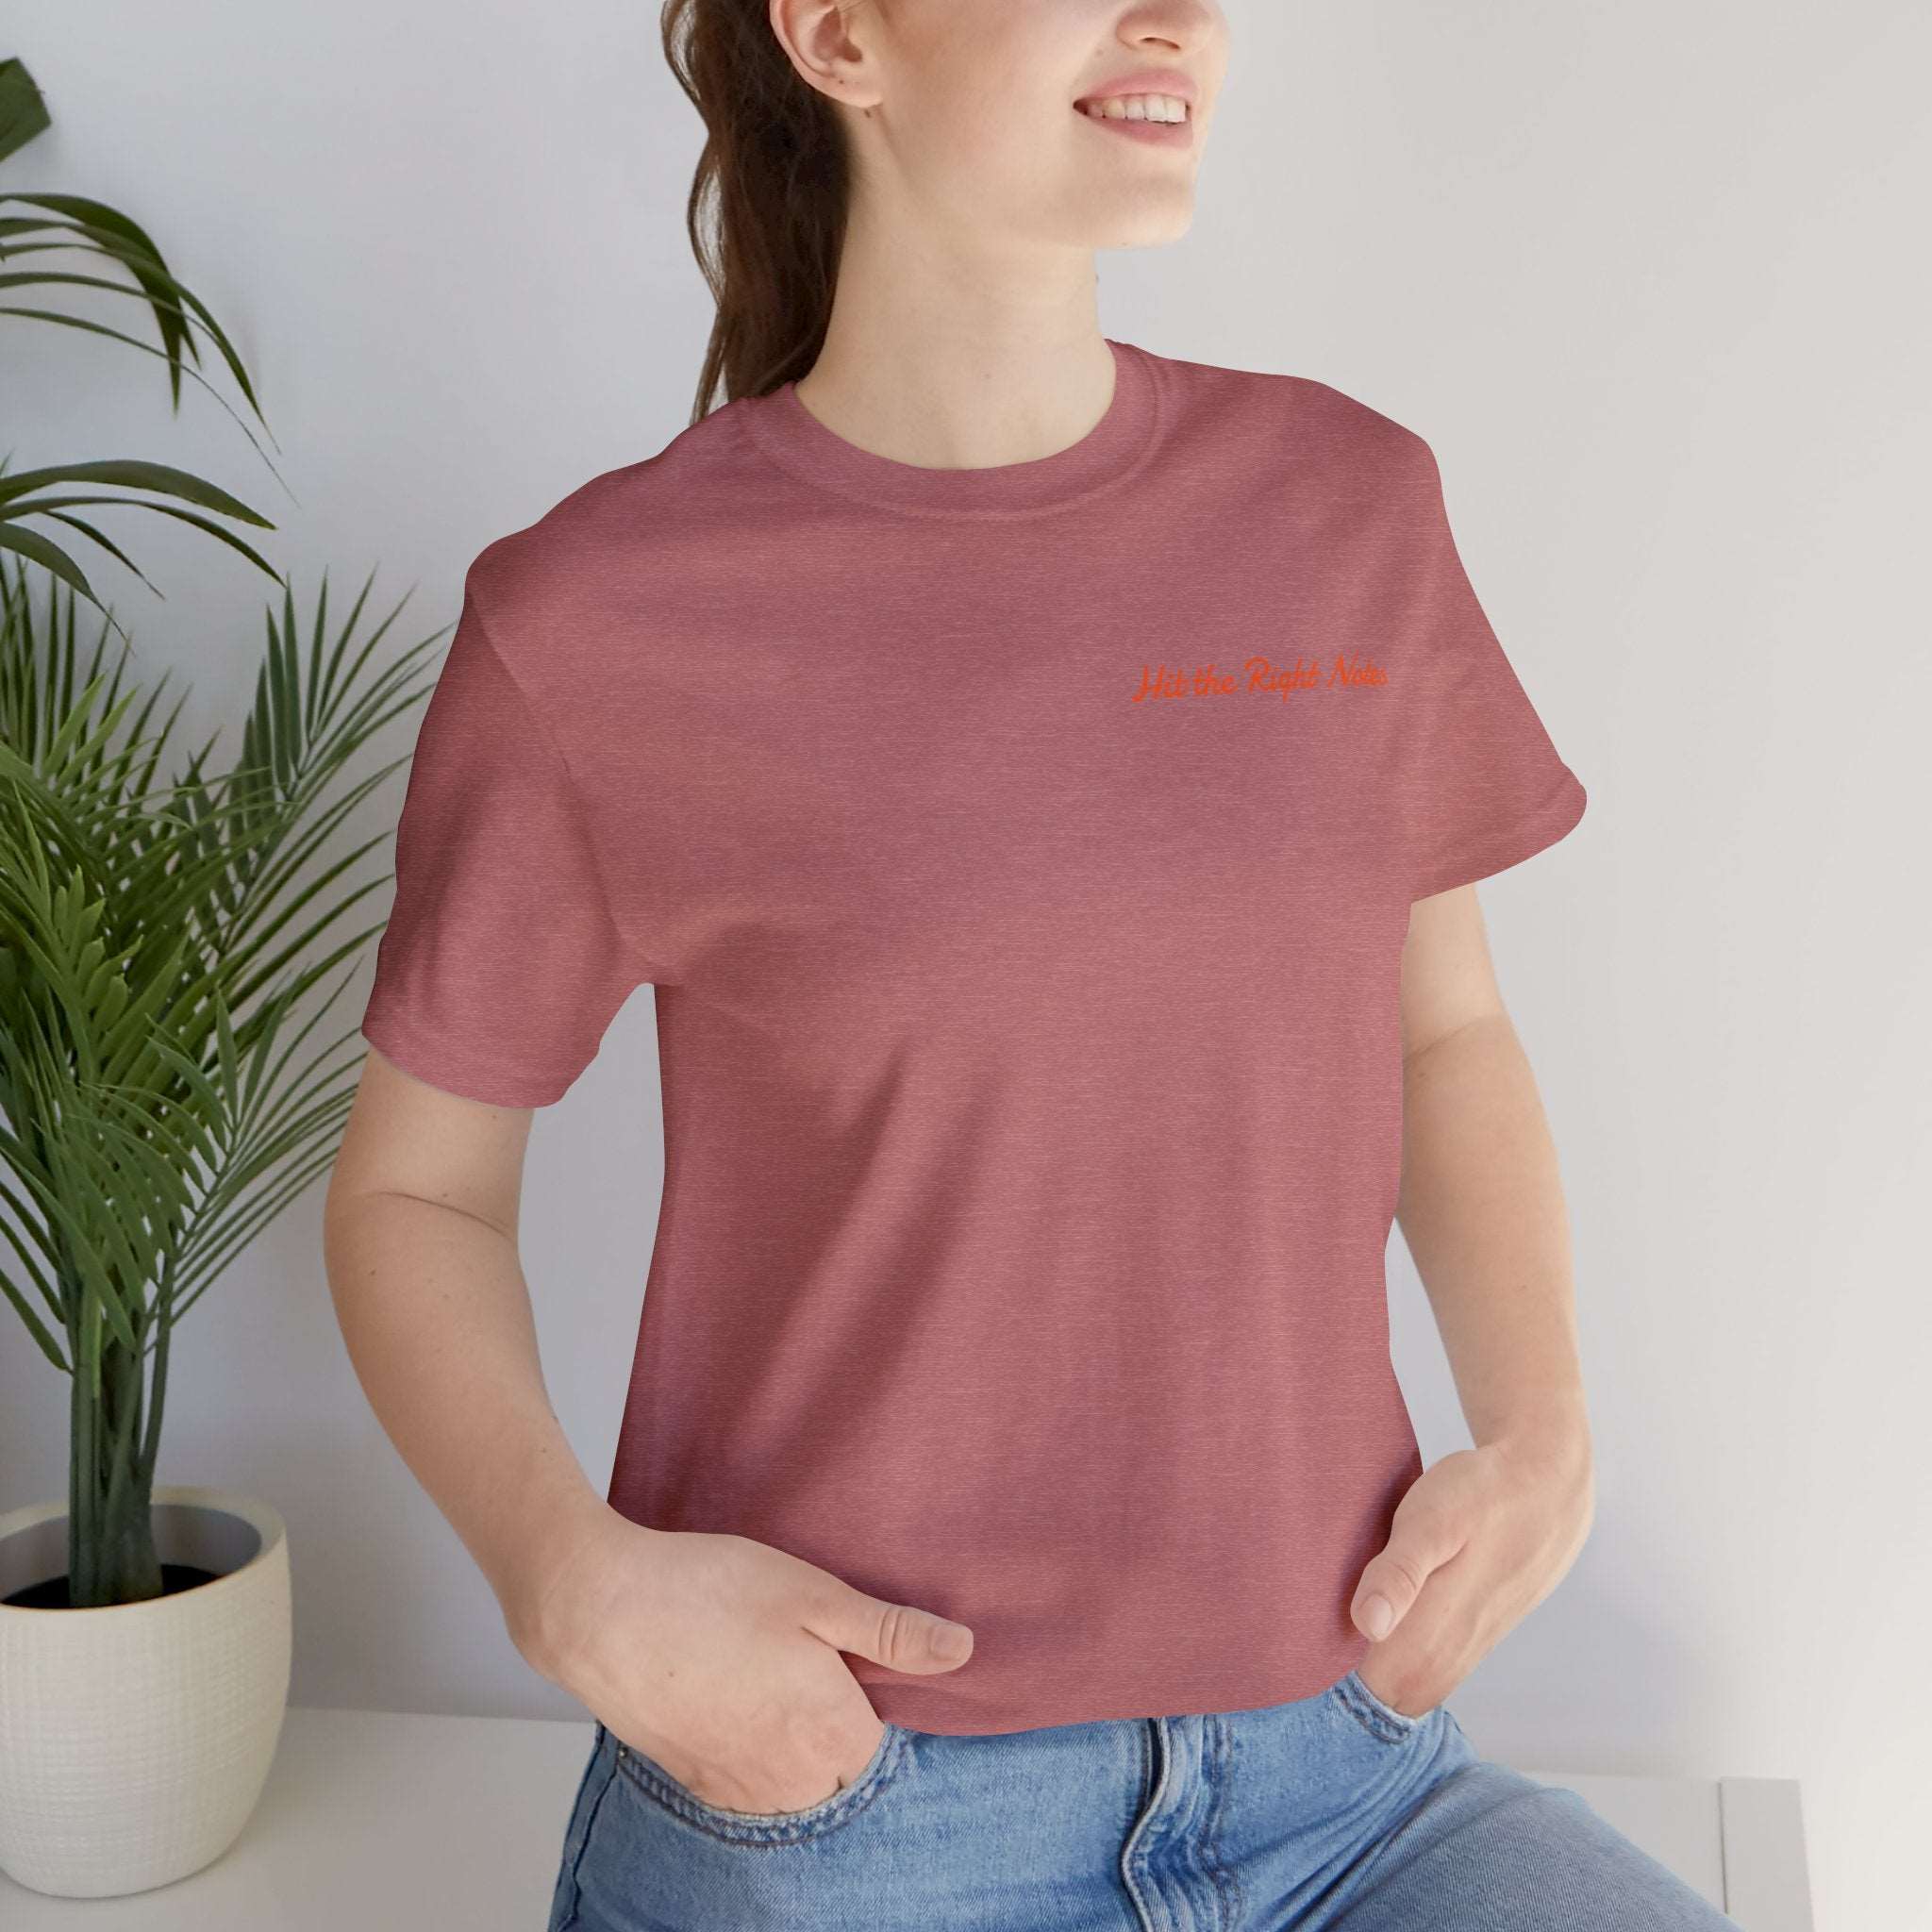 Hit the Right Notes Jersey Tee - Bella+Canvas 3001 Heather Mauve Classic Tee Comfortable Tee Cotton T-Shirt Graphic Tee JerseyTee Statement Shirt T-shirt Tee Unisex Apparel T-Shirt 9613008746183616002_2048_ae37c7a1-037b-4f2e-8ac1-ea1972008e6f Printify